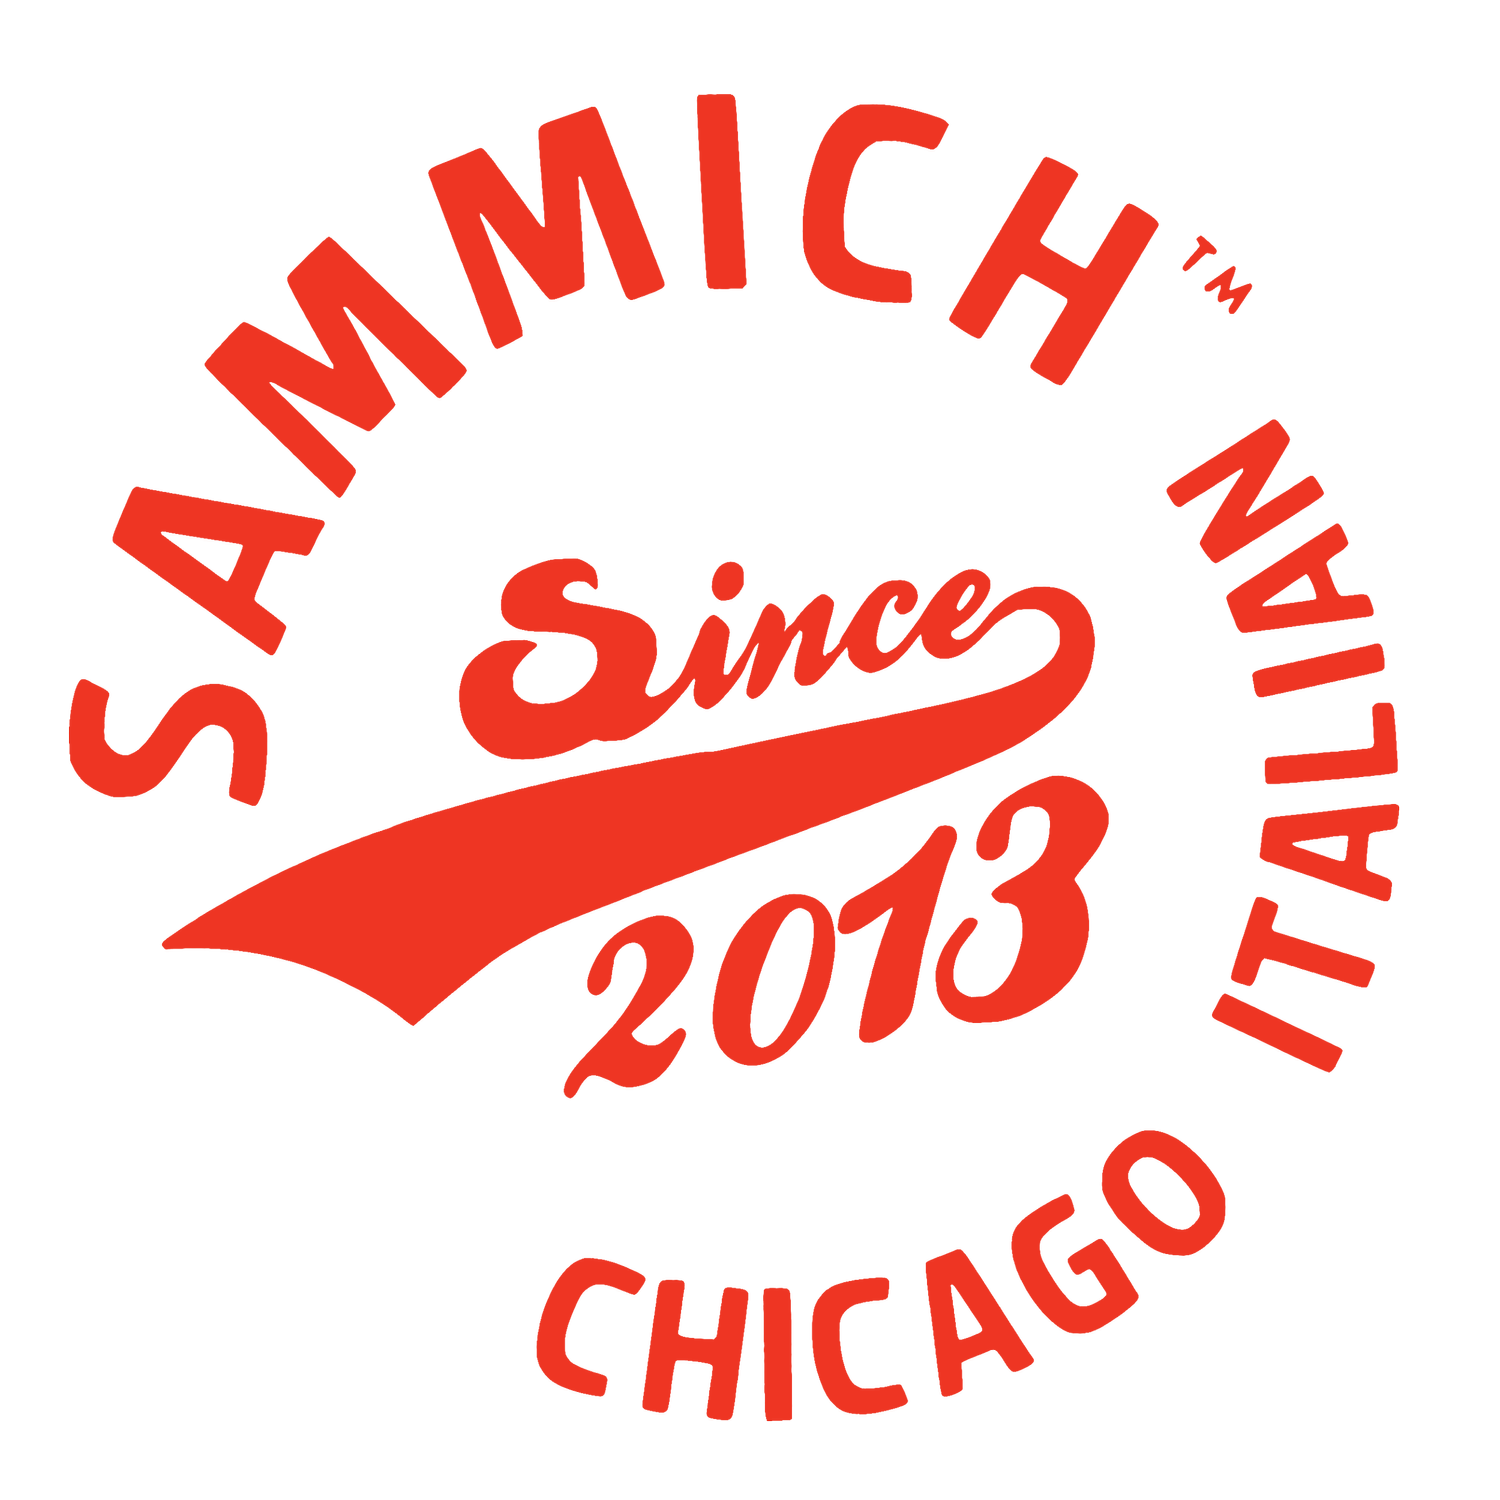 Welcome to Sammich